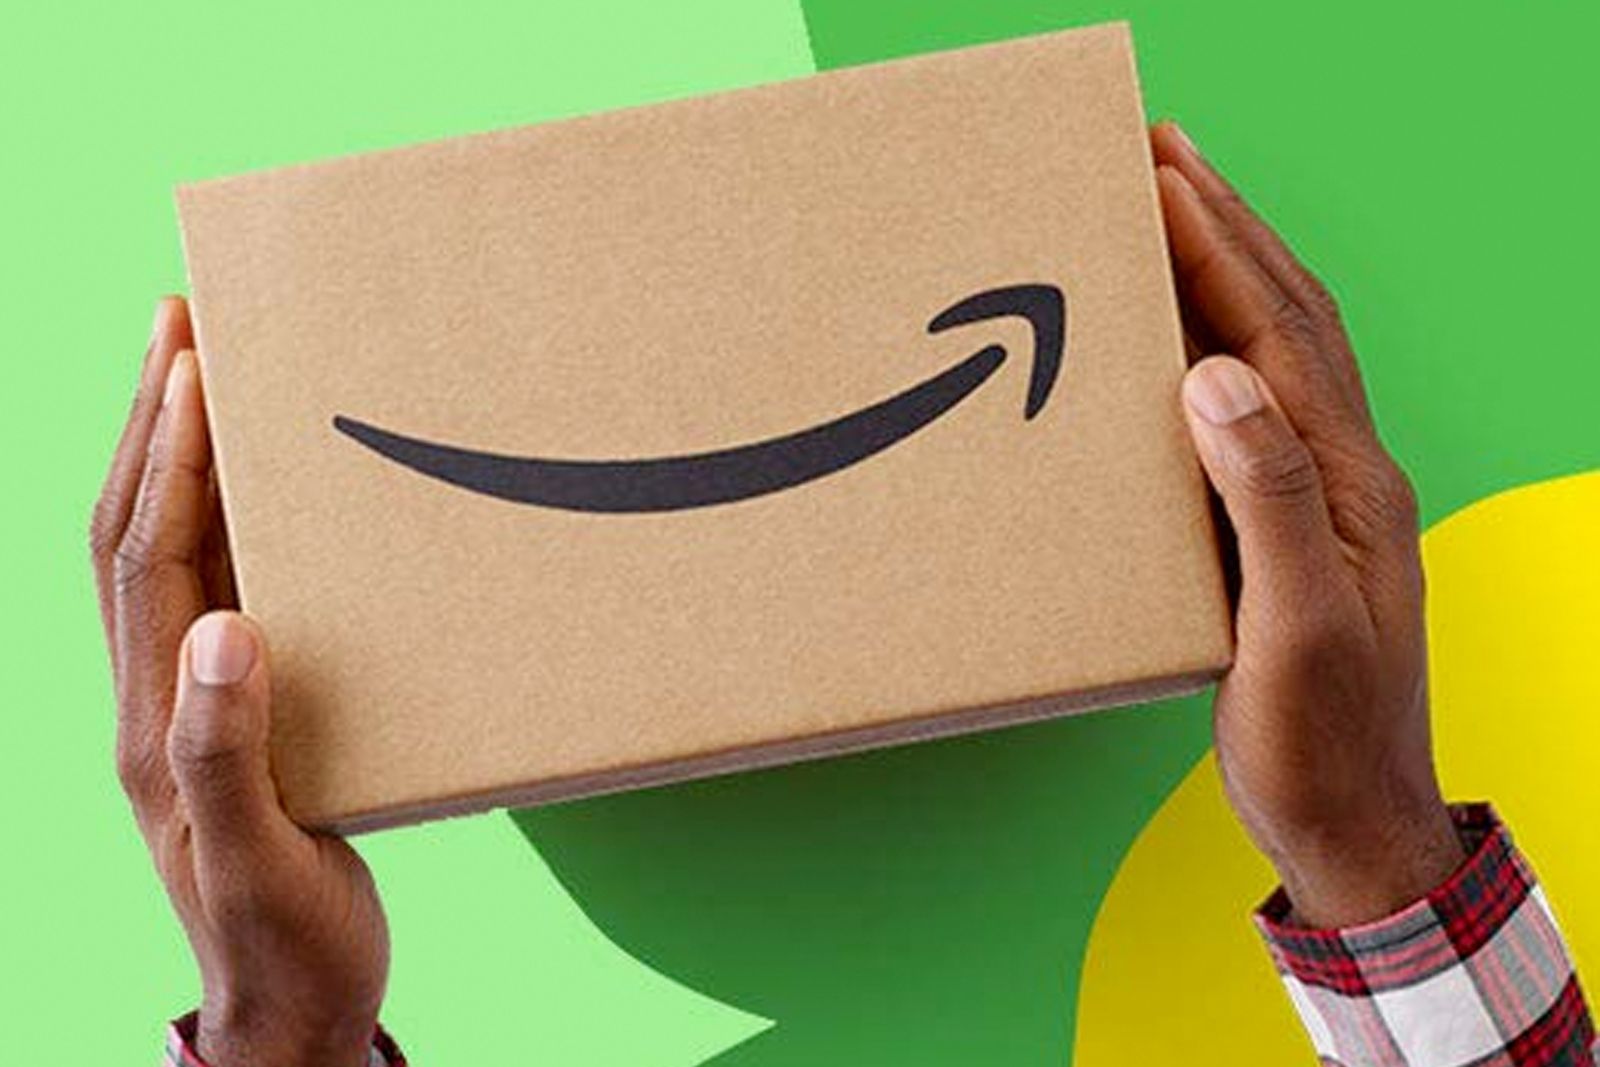 Secret Amazon tips and tricks every shopper should know image 2